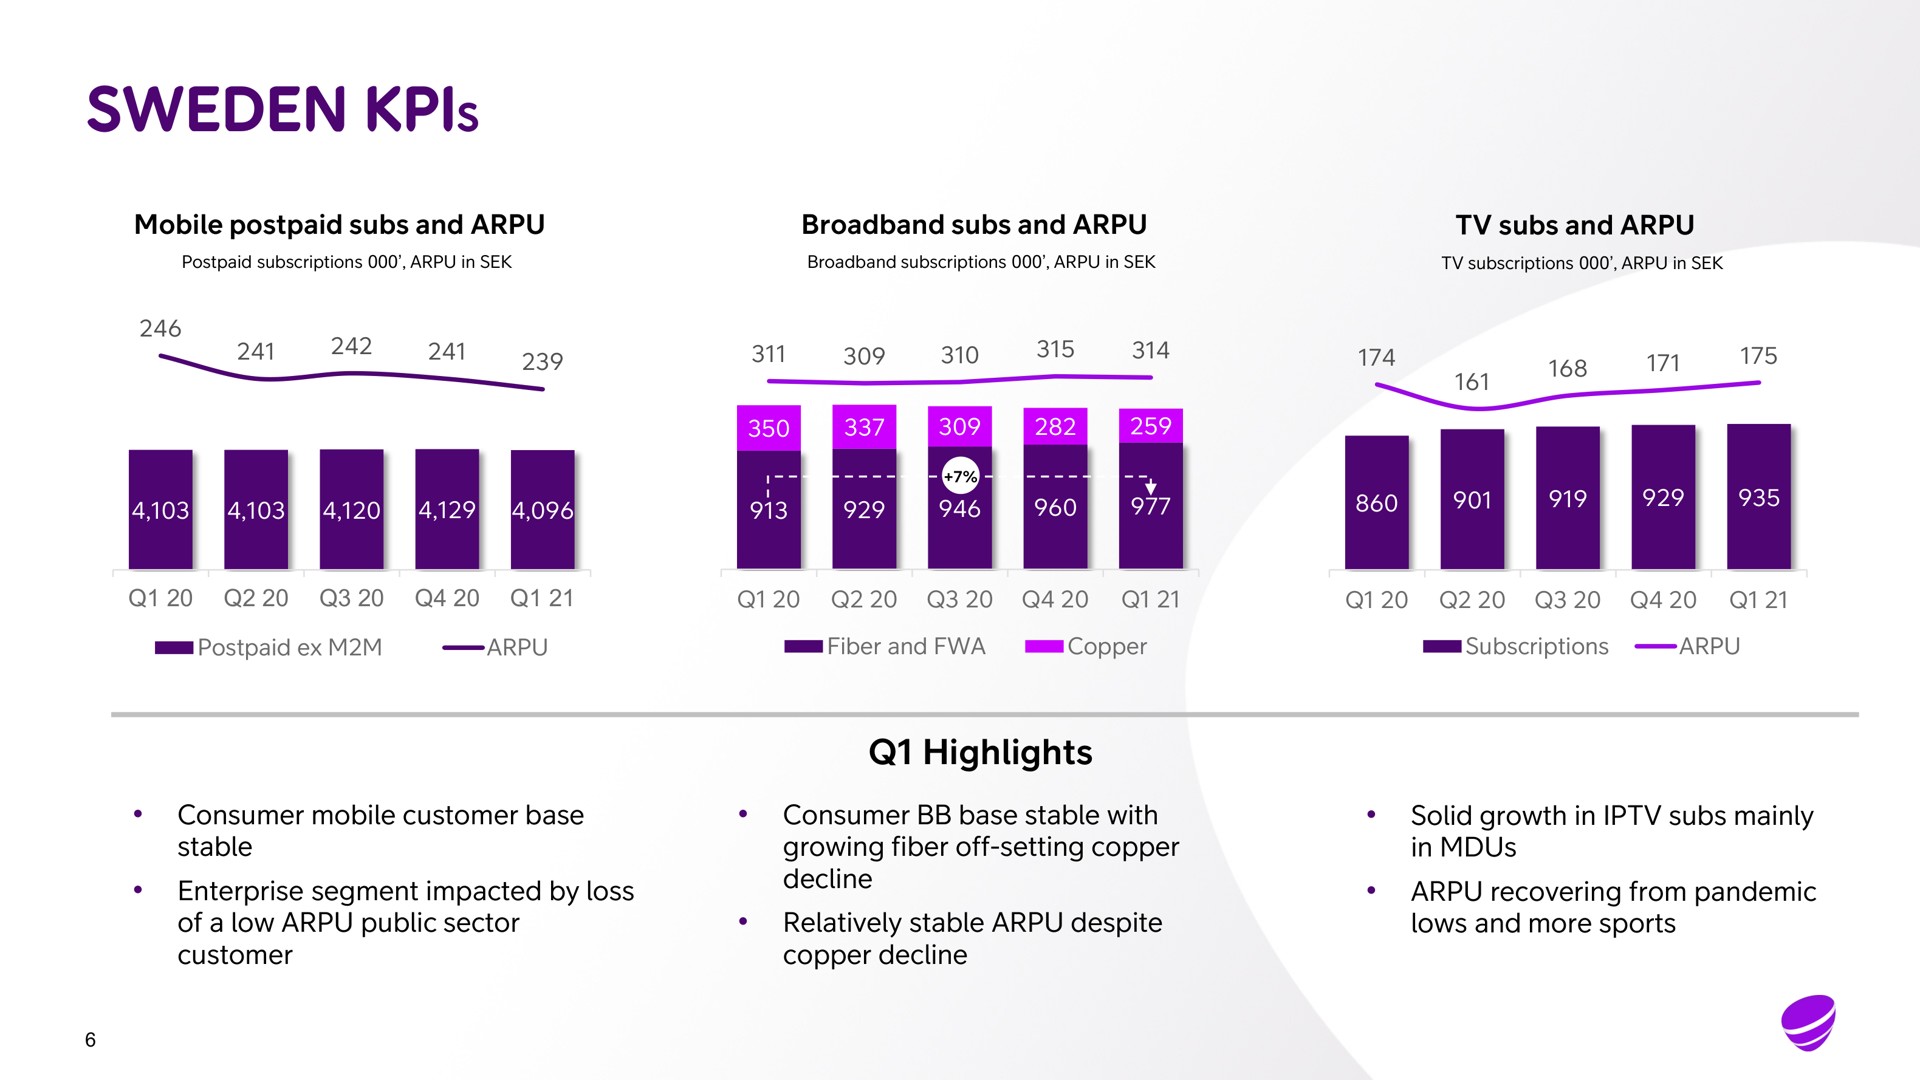 mobile postpaid subs and subs and subs and highlights consumer mobile customer base stable enterprise segment impacted by loss of a low public sector customer consumer base stable with growing fiber off setting copper decline relatively stable despite copper decline solid growth in subs mainly in recovering from pandemic lows and more sports | Telia Company